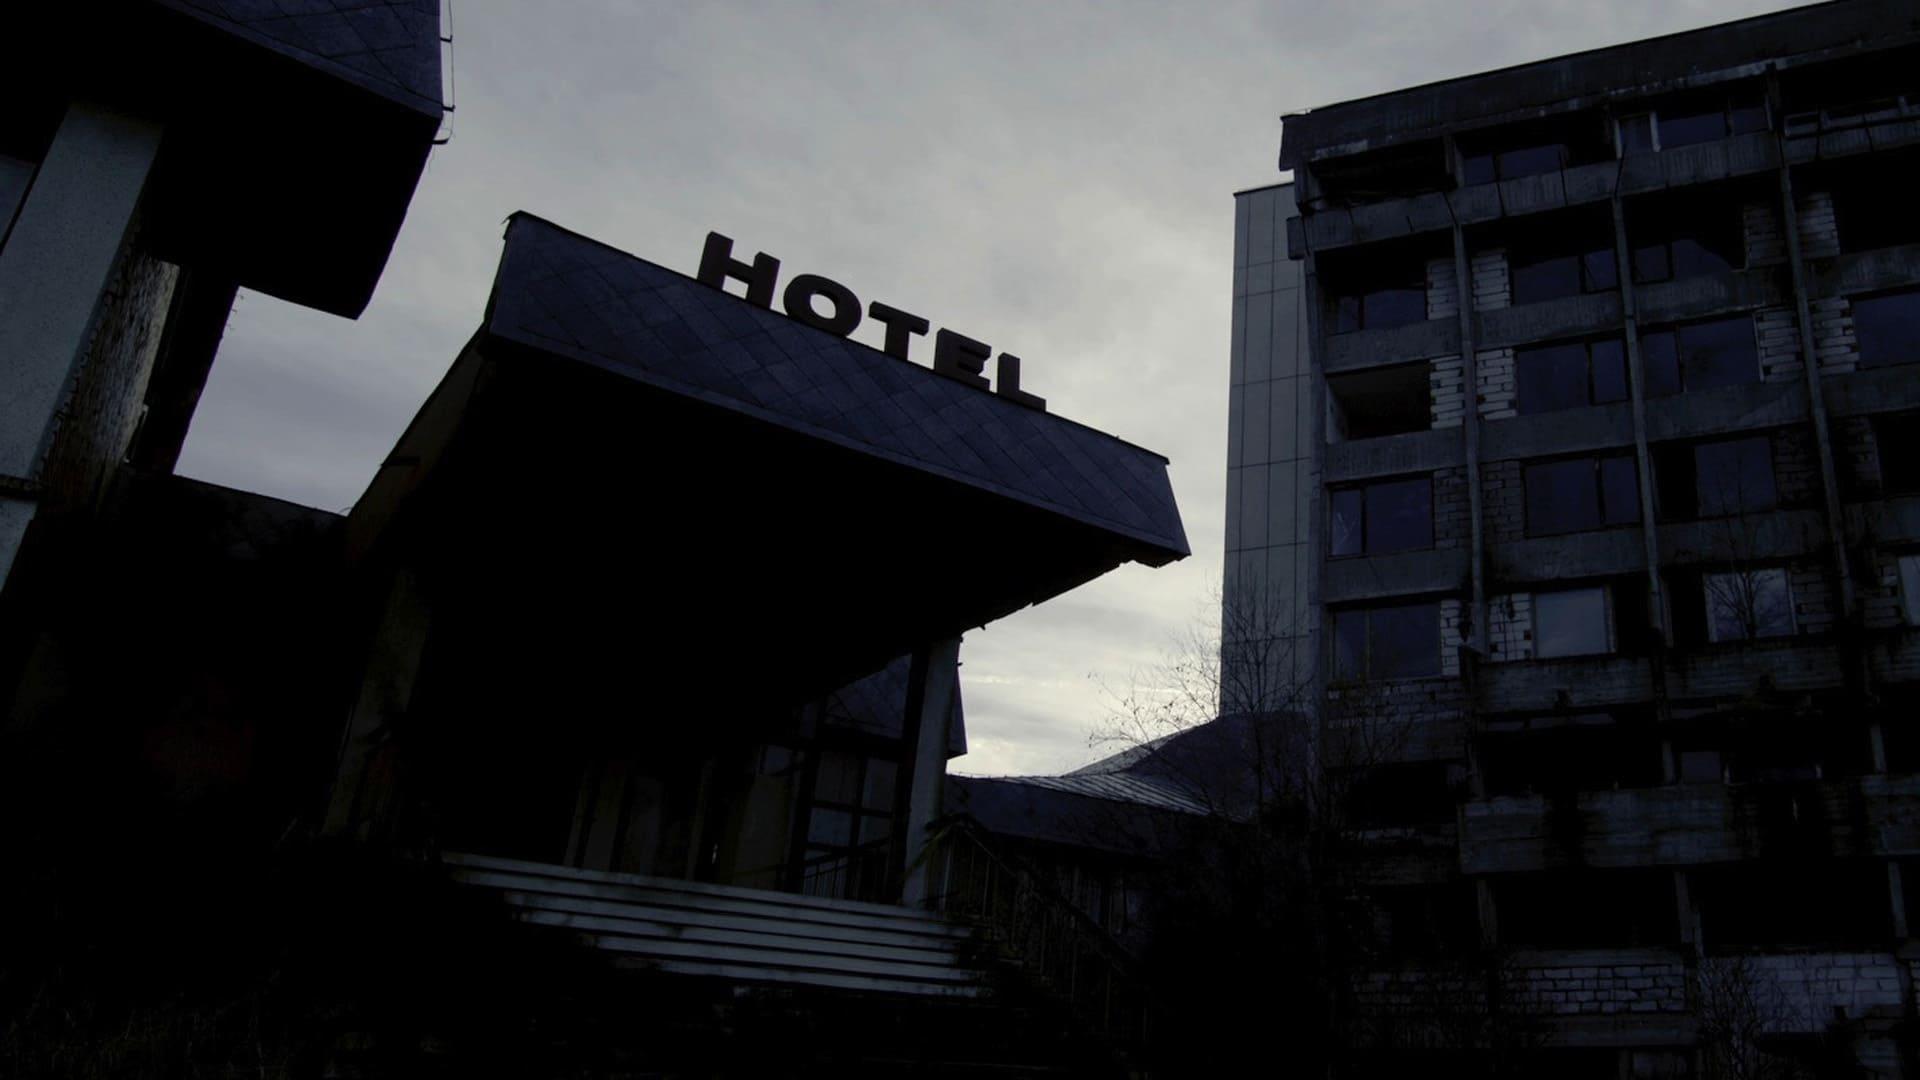 Hotel of the Damned backdrop